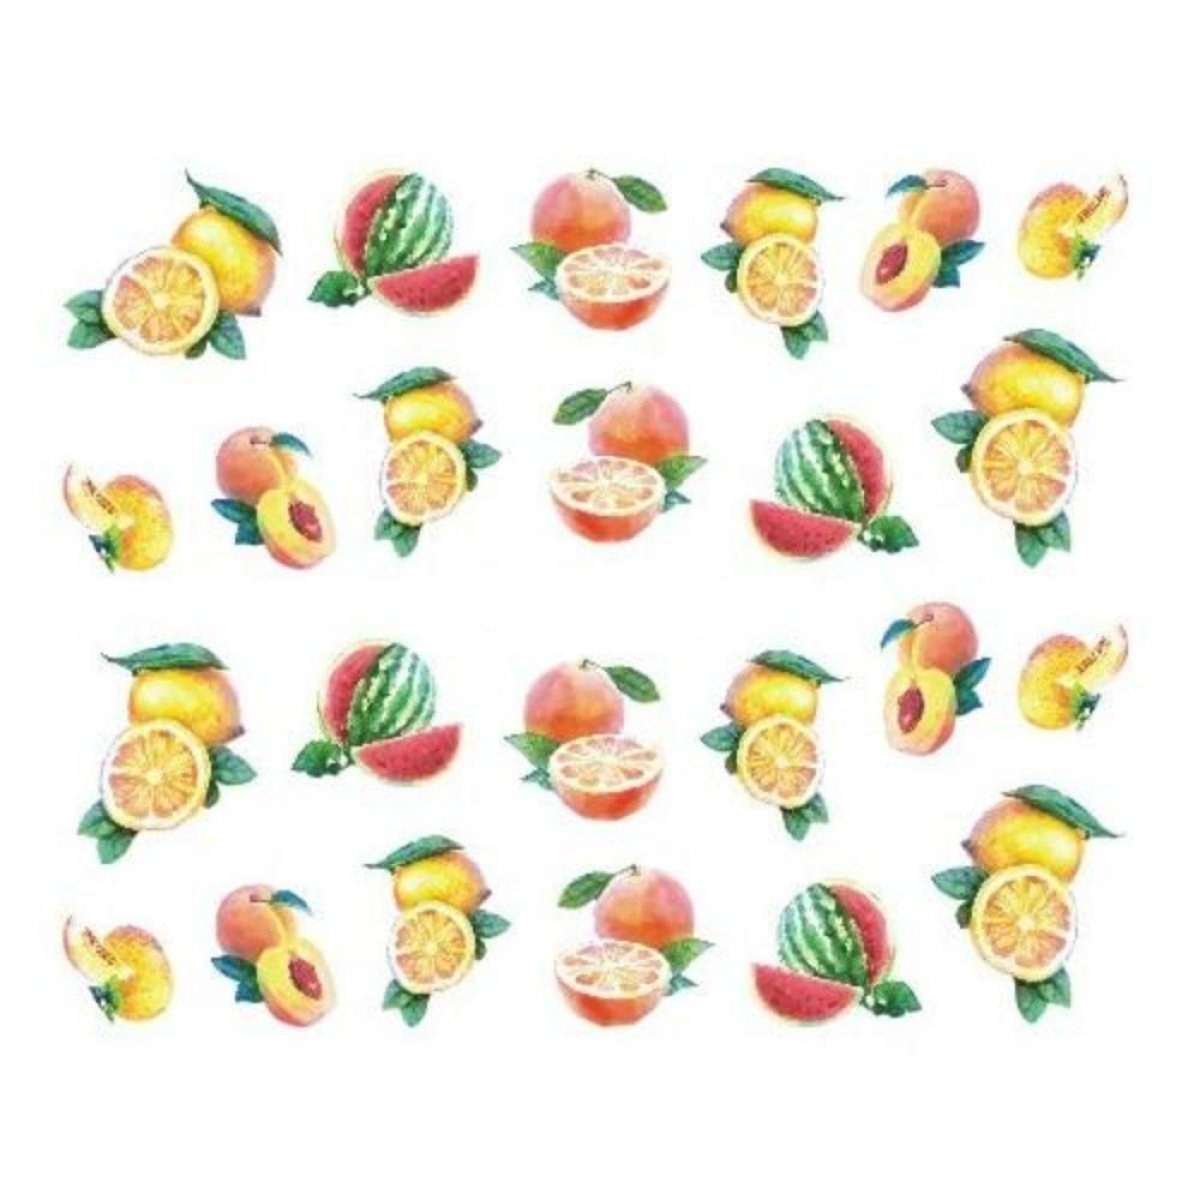 Strawberry Summer Cake & Fruit Stickers For Nails Nail Manicure Art Stz-488 - Sheet